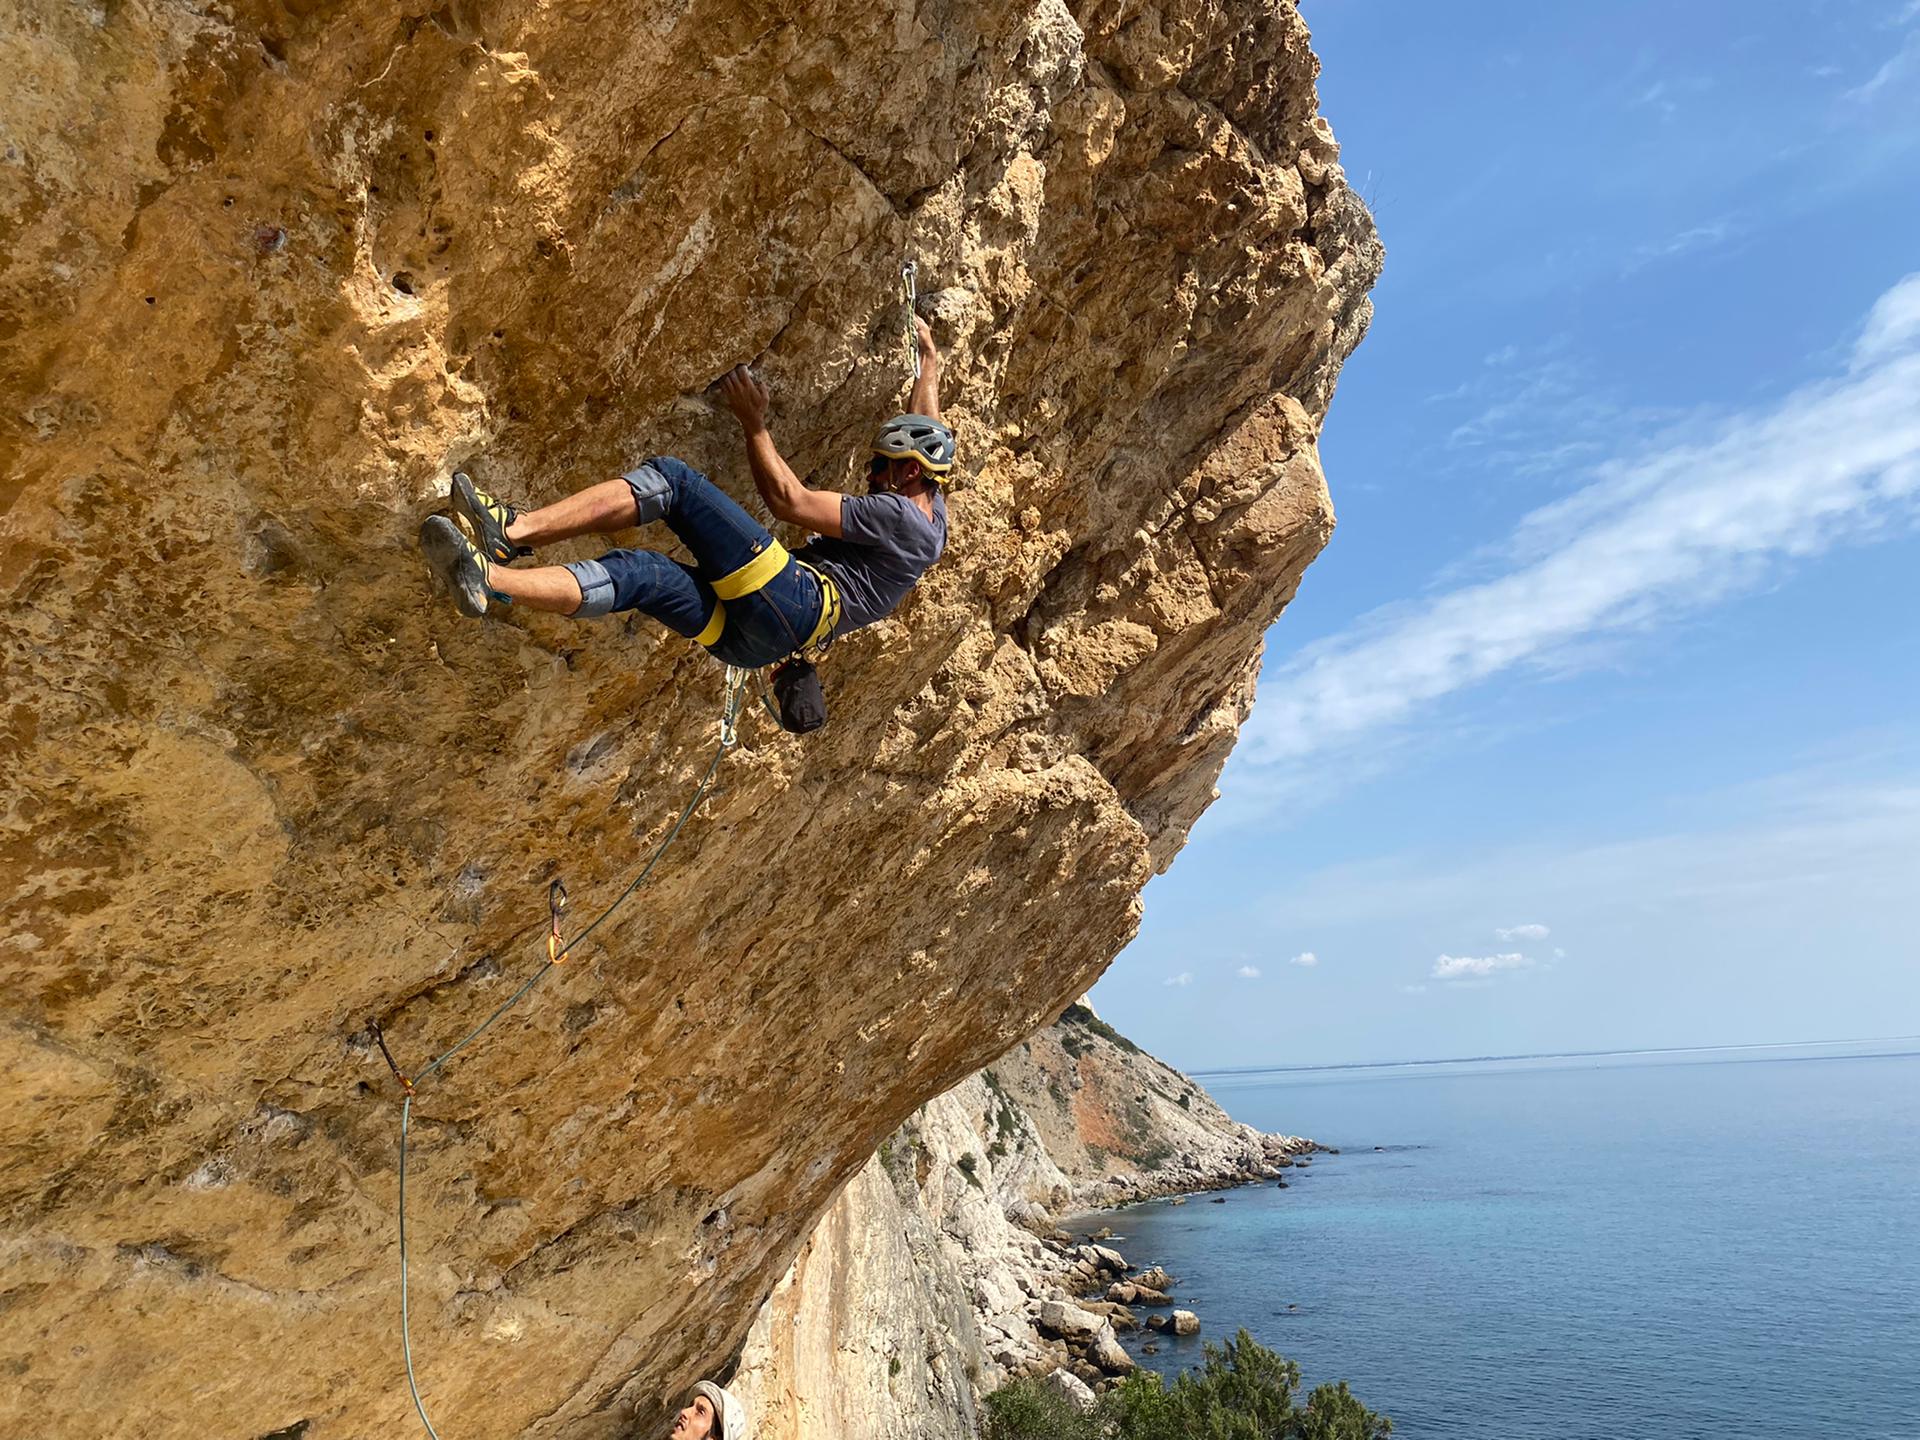 Share for Bolts partner Filipe climbing in Western Portugal